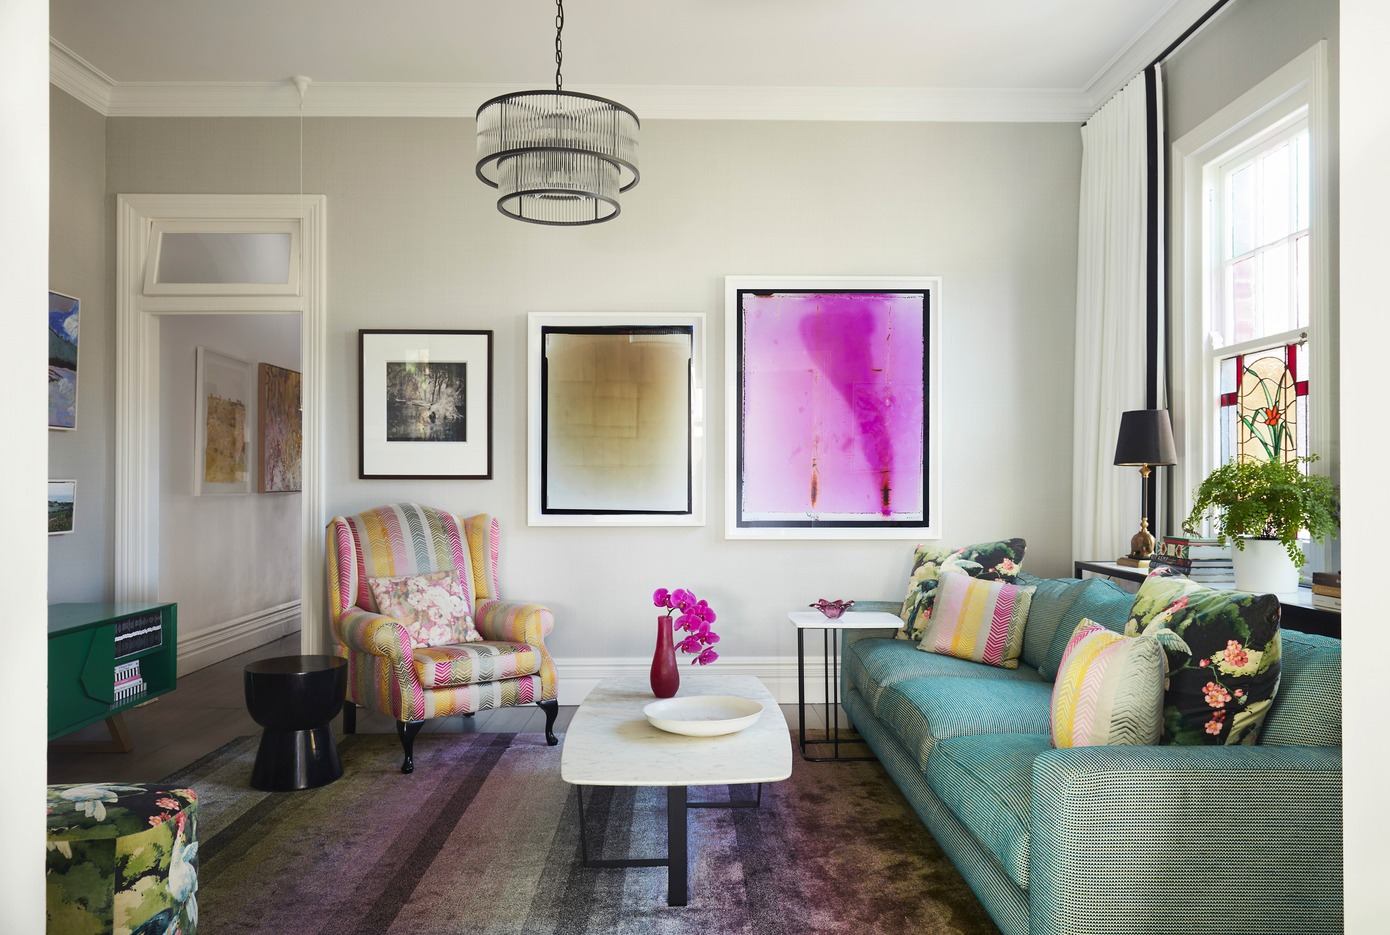 The Pink House: Merging Heritage with Modern Flair